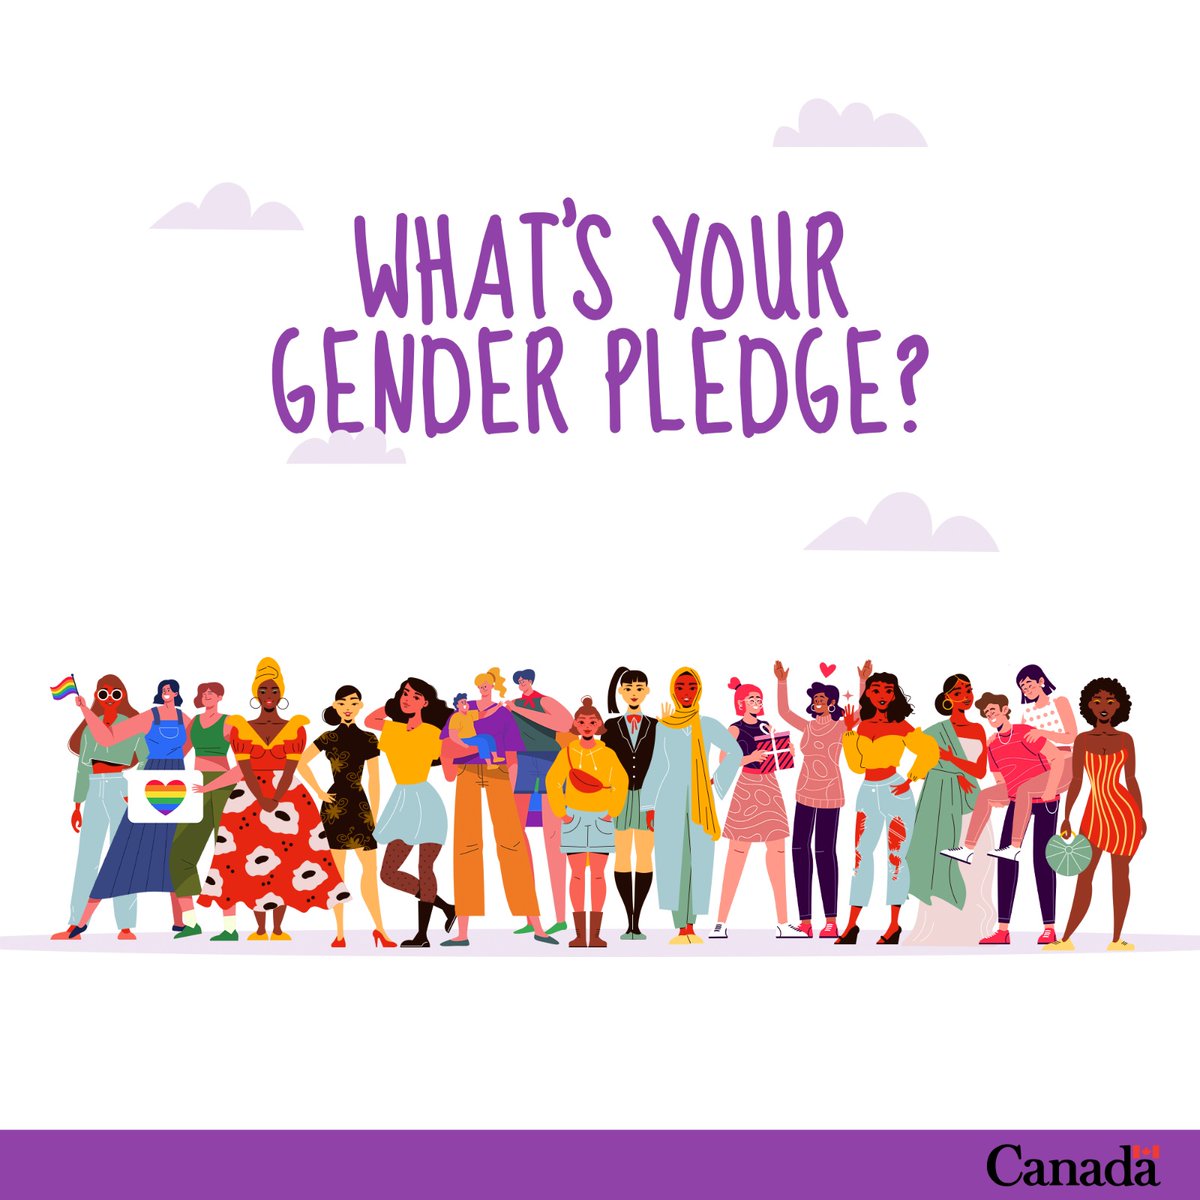 Have you shared your #GenderPledge?
We want to hear about your work to advance gender equality; - we all have a role in #GenerationEquality!
#IWD2023